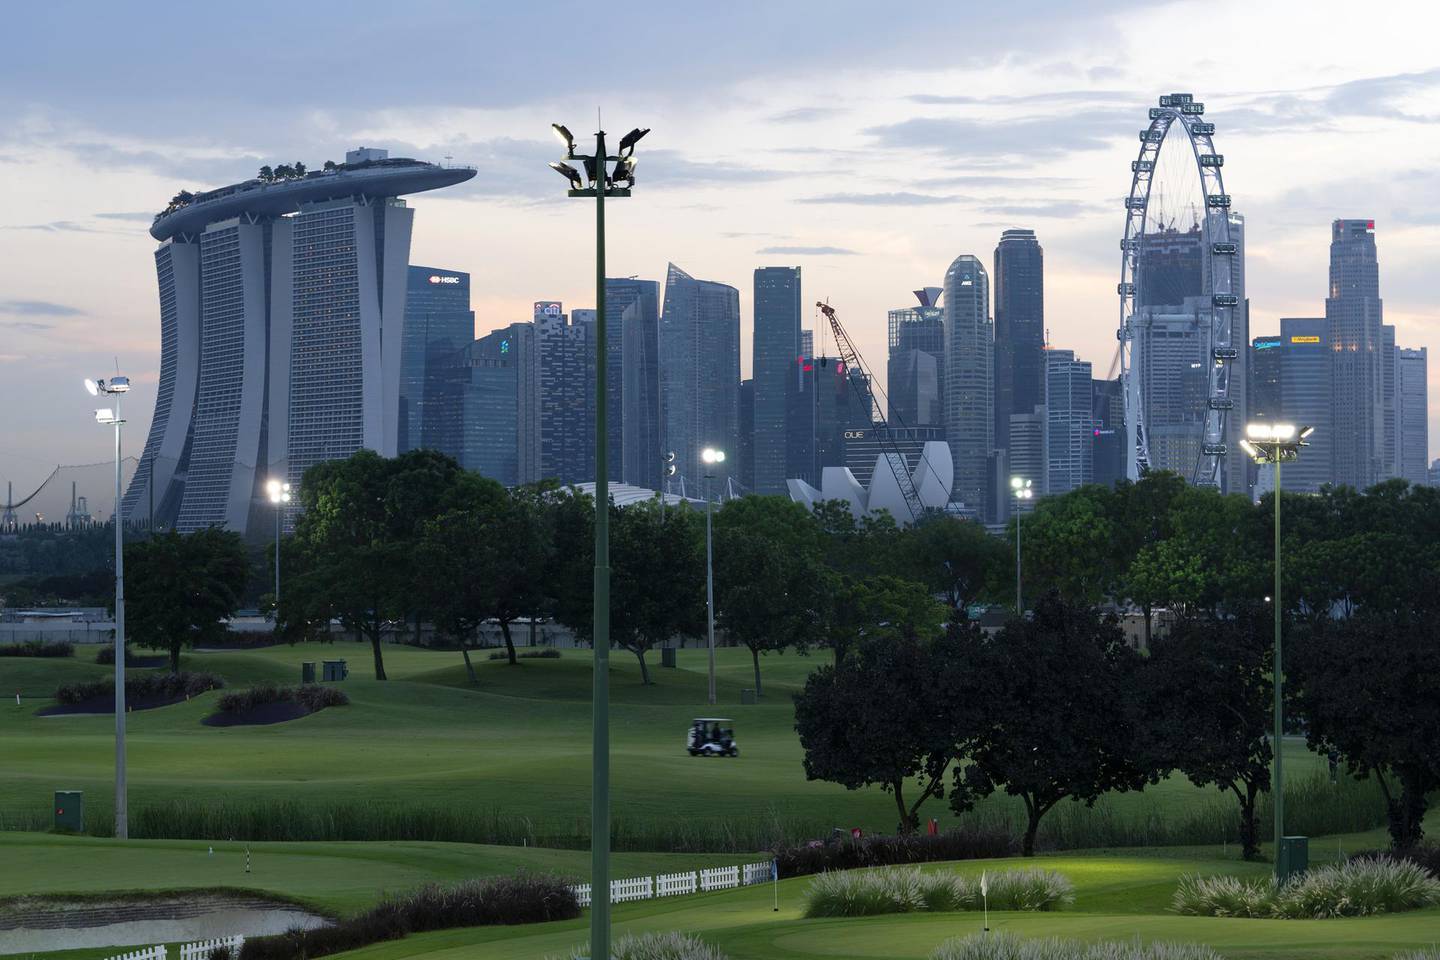 Golfers ride a buggy along a fairway at dusk at the Marina Bay Golf Course in Singapore, Tuesday, April 6, 2021. With borders closed for more than a year and relatively few Covid-19 cases in the city-state, golfers have flocked to Singapore's 15 courses, making tee times almost impossible to get and driving prices for the private clubs to record highs. At Marina Bay, the only public 18-hole course, demand is so great it may help persuade the government to extend the lease on the land so the club can stay open beyond 2024. Photographer: Wei Leng Tay/Bloomberg